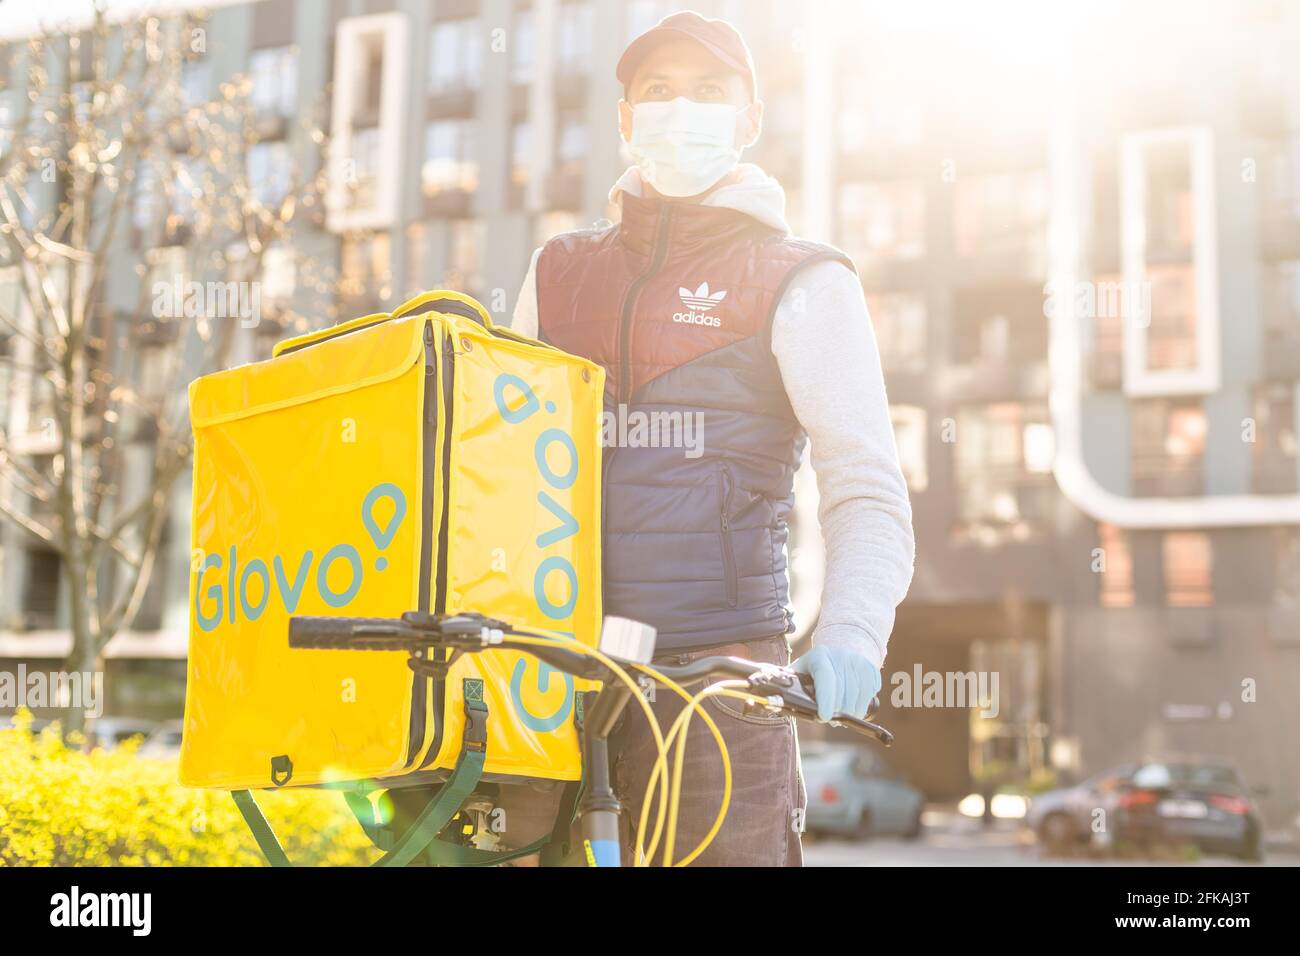 KIEV, UKRAINE - 28 April, 2021: Glovo delivery boy with famous yellow box  and bicycle on the street. delivery service worker on bike Stock Photo -  Alamy